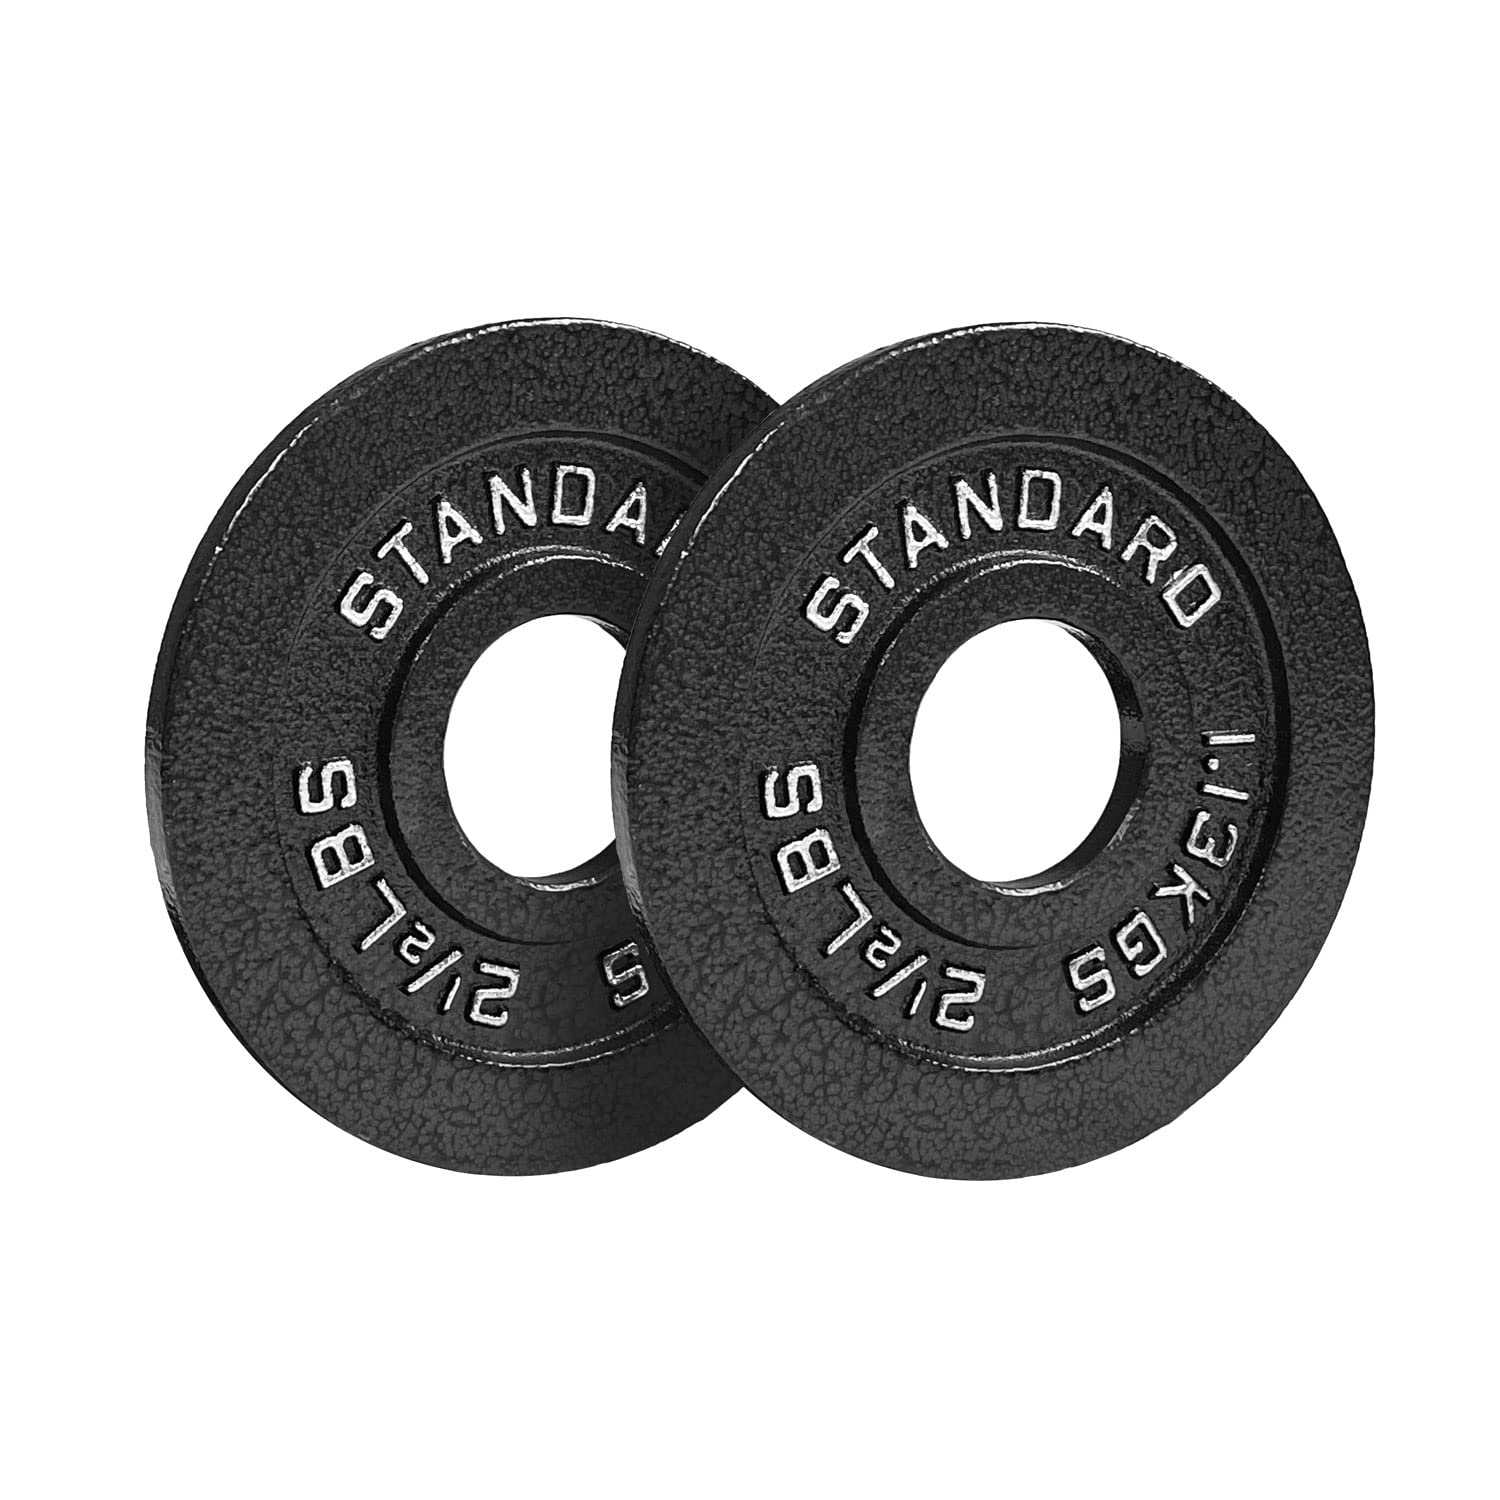 Steel Olympic Plates 2.5lb Pair - Olympic Standard Premium Coated 2x 2.5 Pound Weights for Weight Lifting